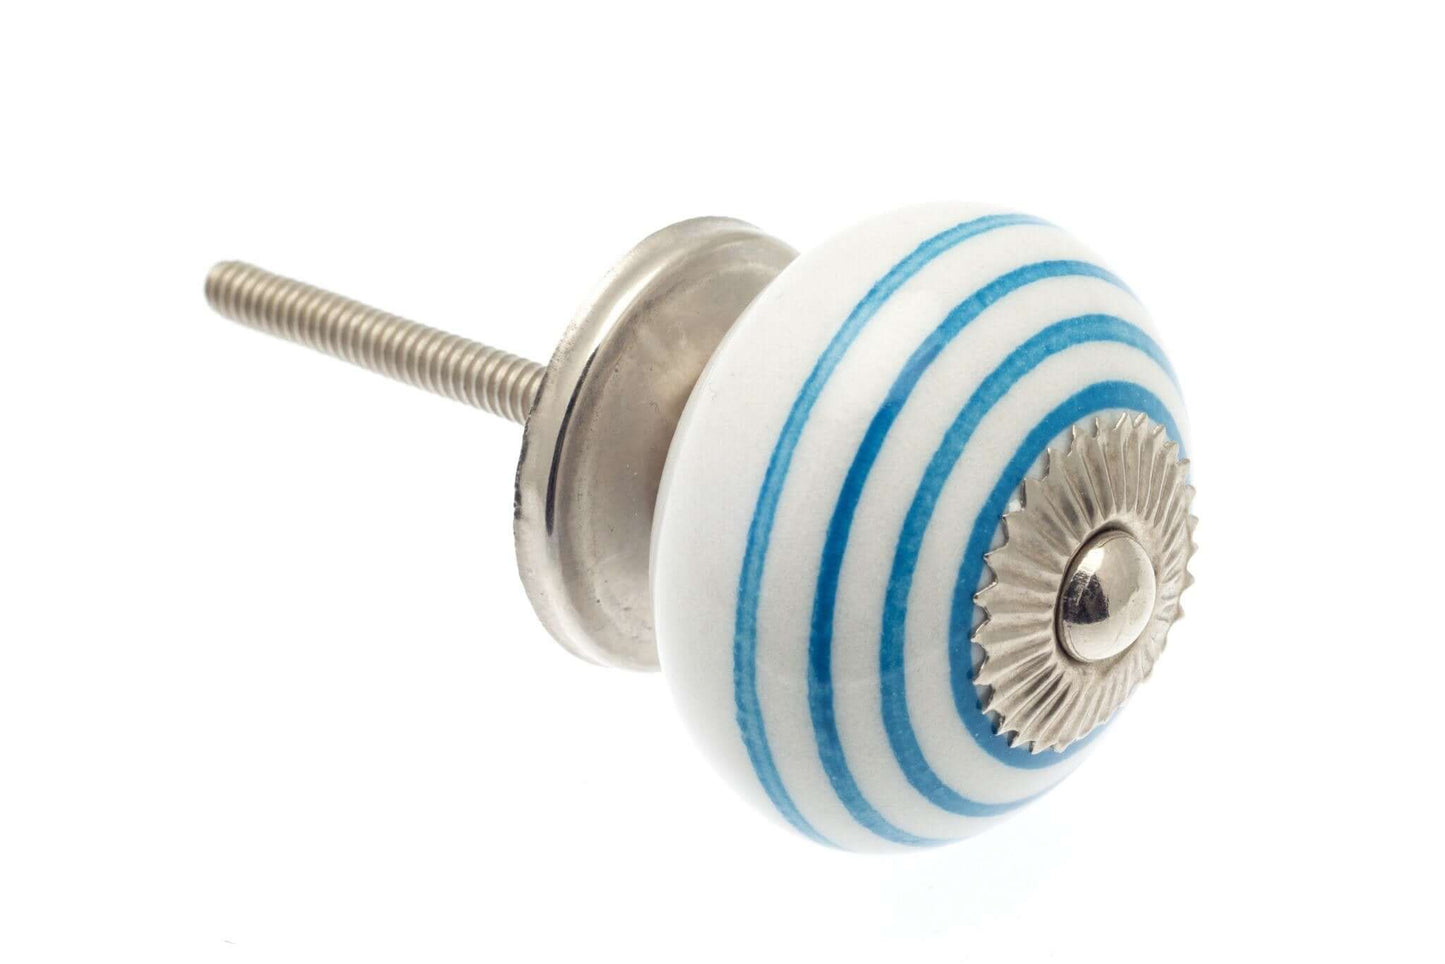 Ceramic Cupboard Knobs - Round Ceramic Knob White With Blue Stripes / Hoops 40mm (MT-007)